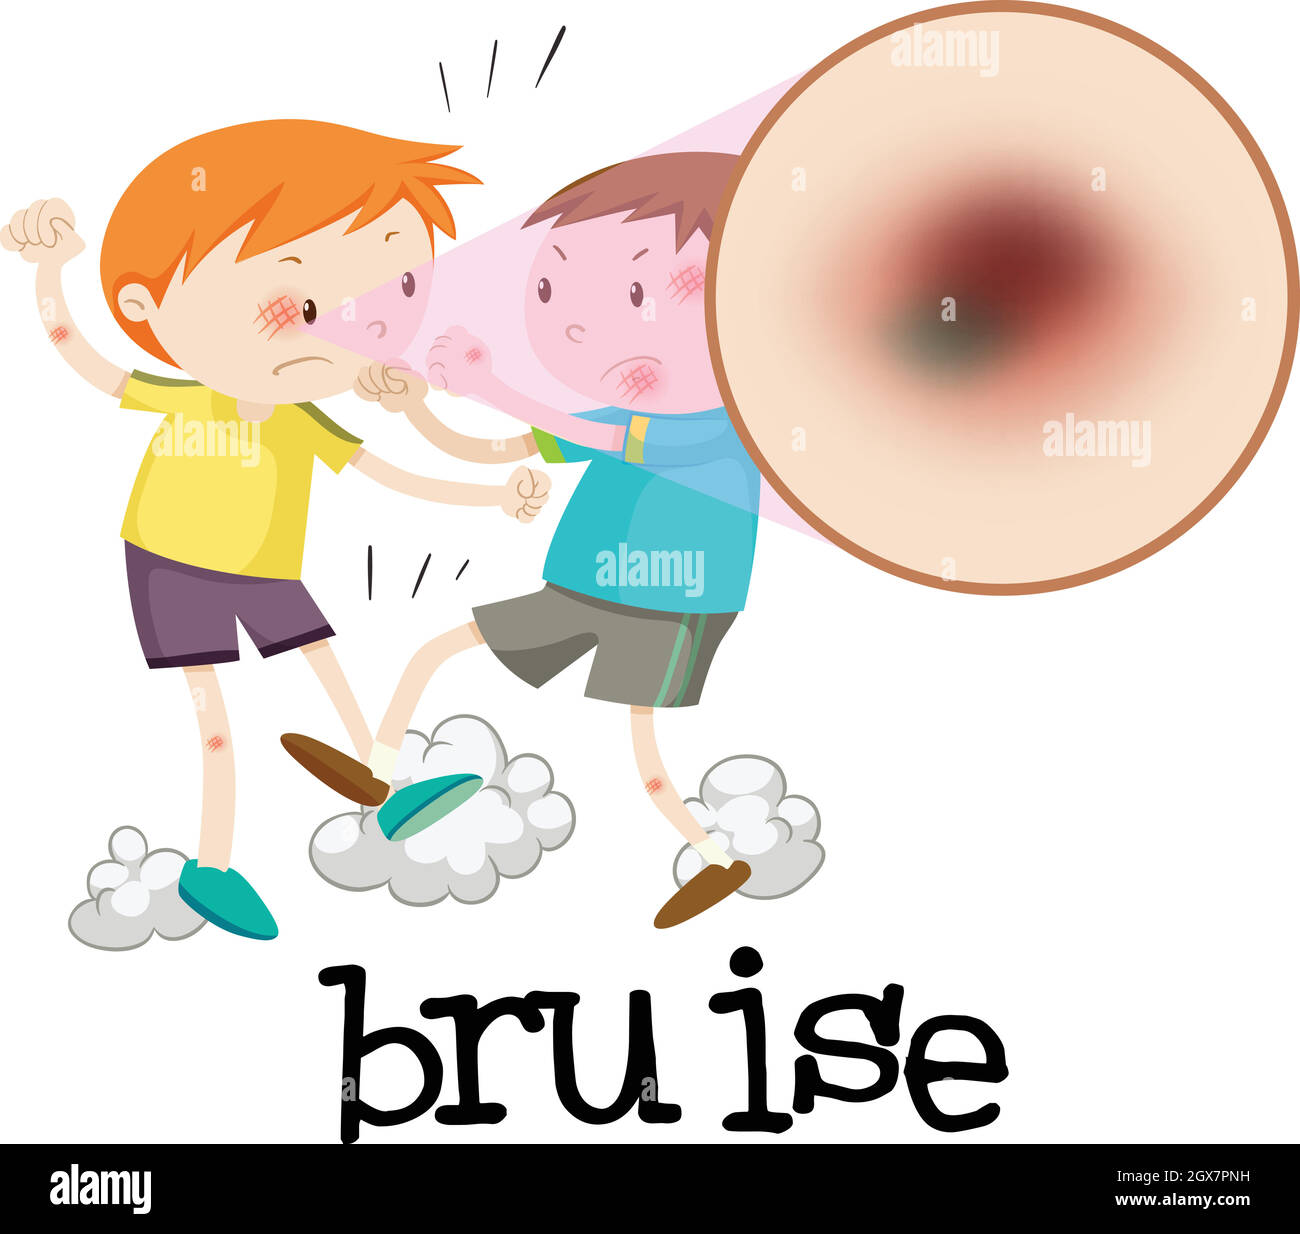 Boys Fighting and Having Bruise Stock Vector